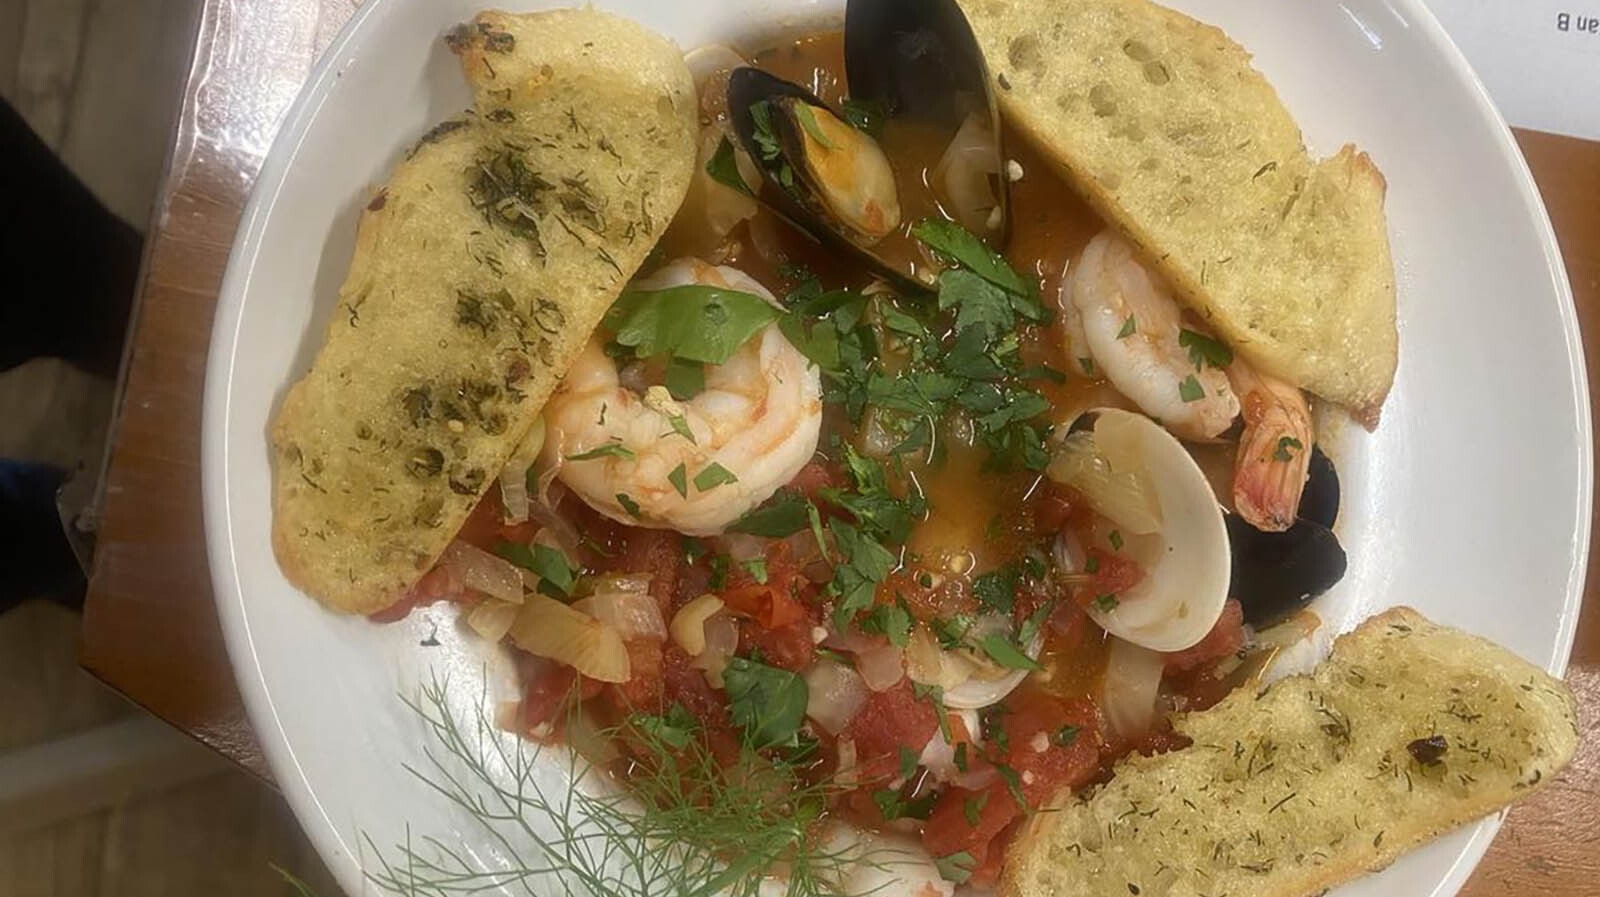 Cioppino, or fisherman’s stew, is a popular Italian dish offered at the Steamboat Deli.